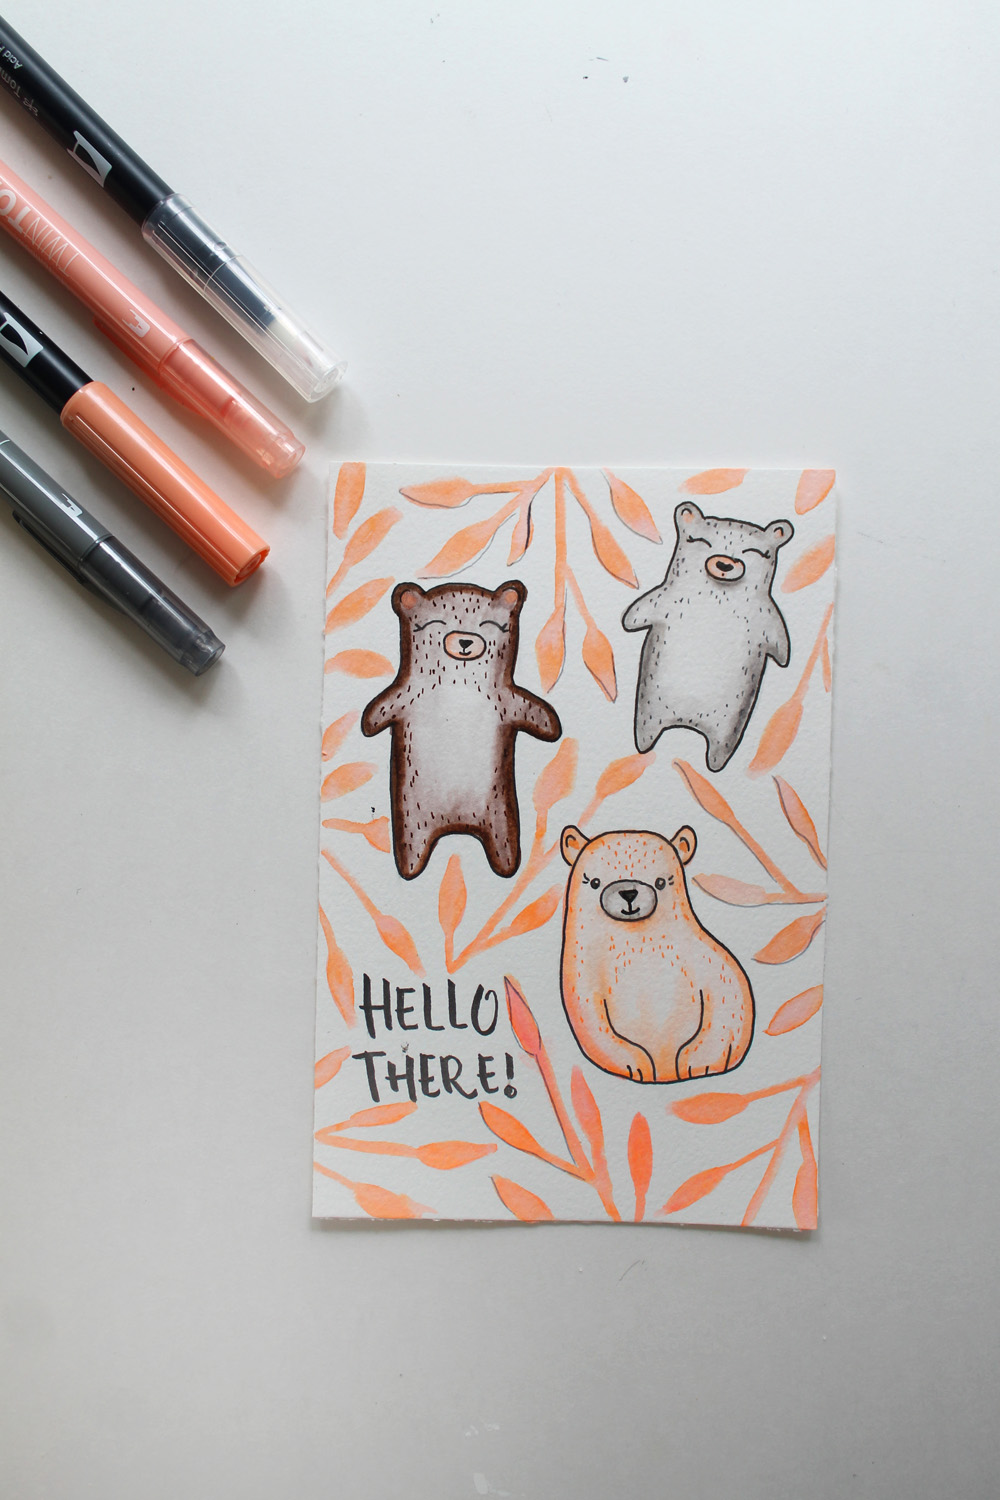 Learn how to draw bears in a really cute doodle style, using this tutorial by @Studio.katie on the @Tombowusa blog